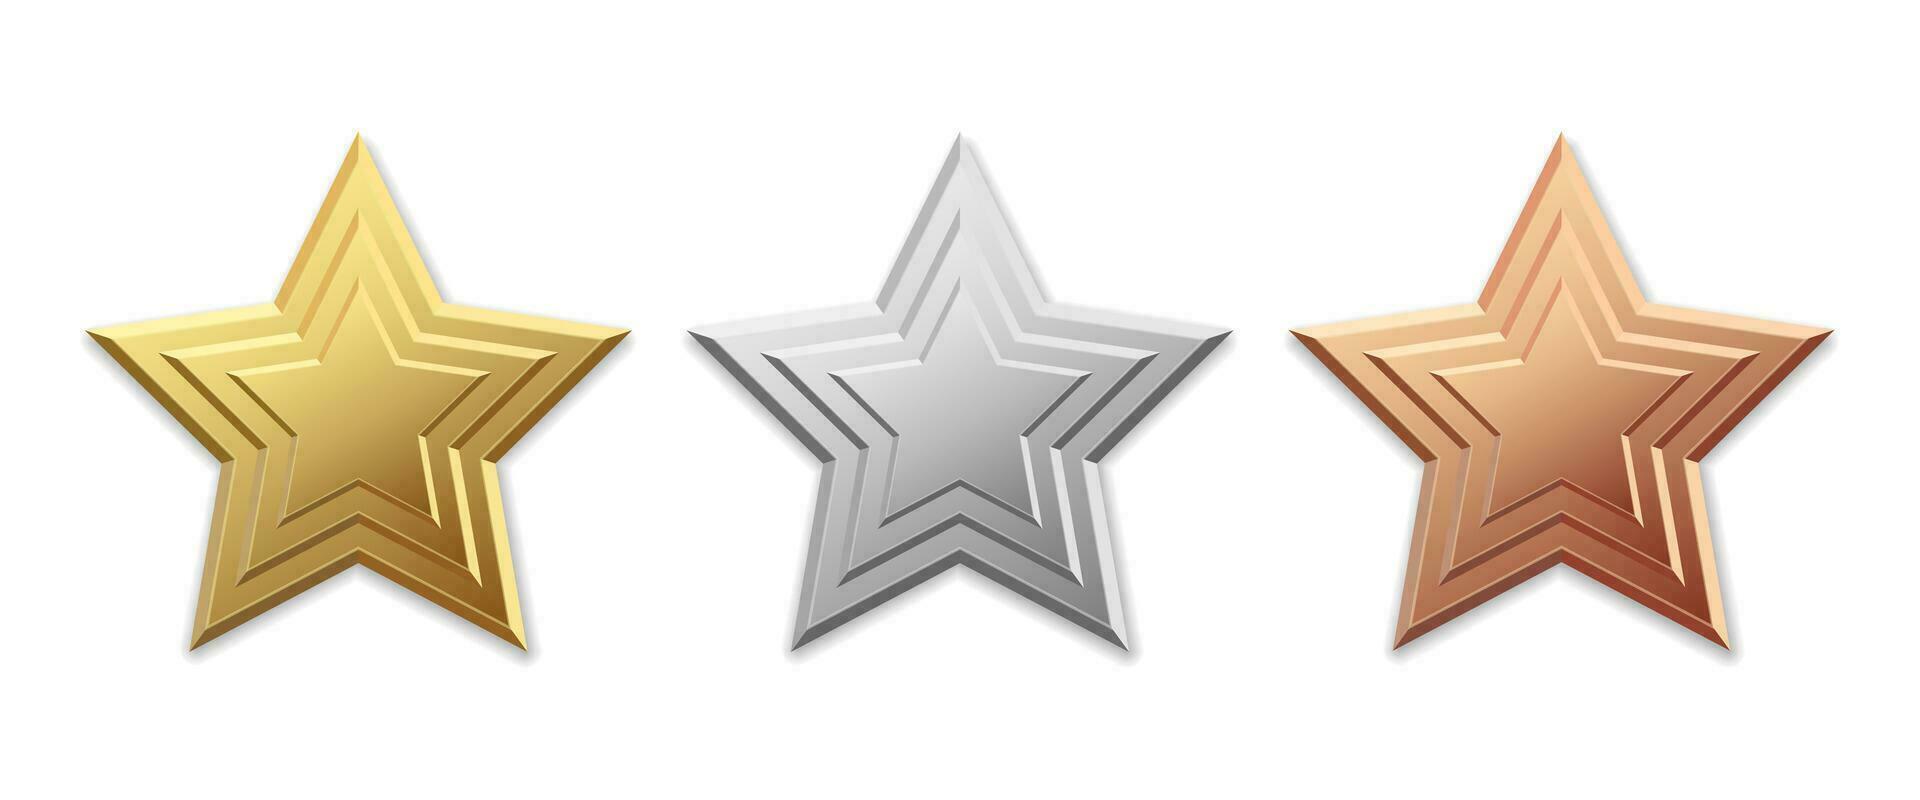 Golden silver and bronze star product rating review for apps and websites vector